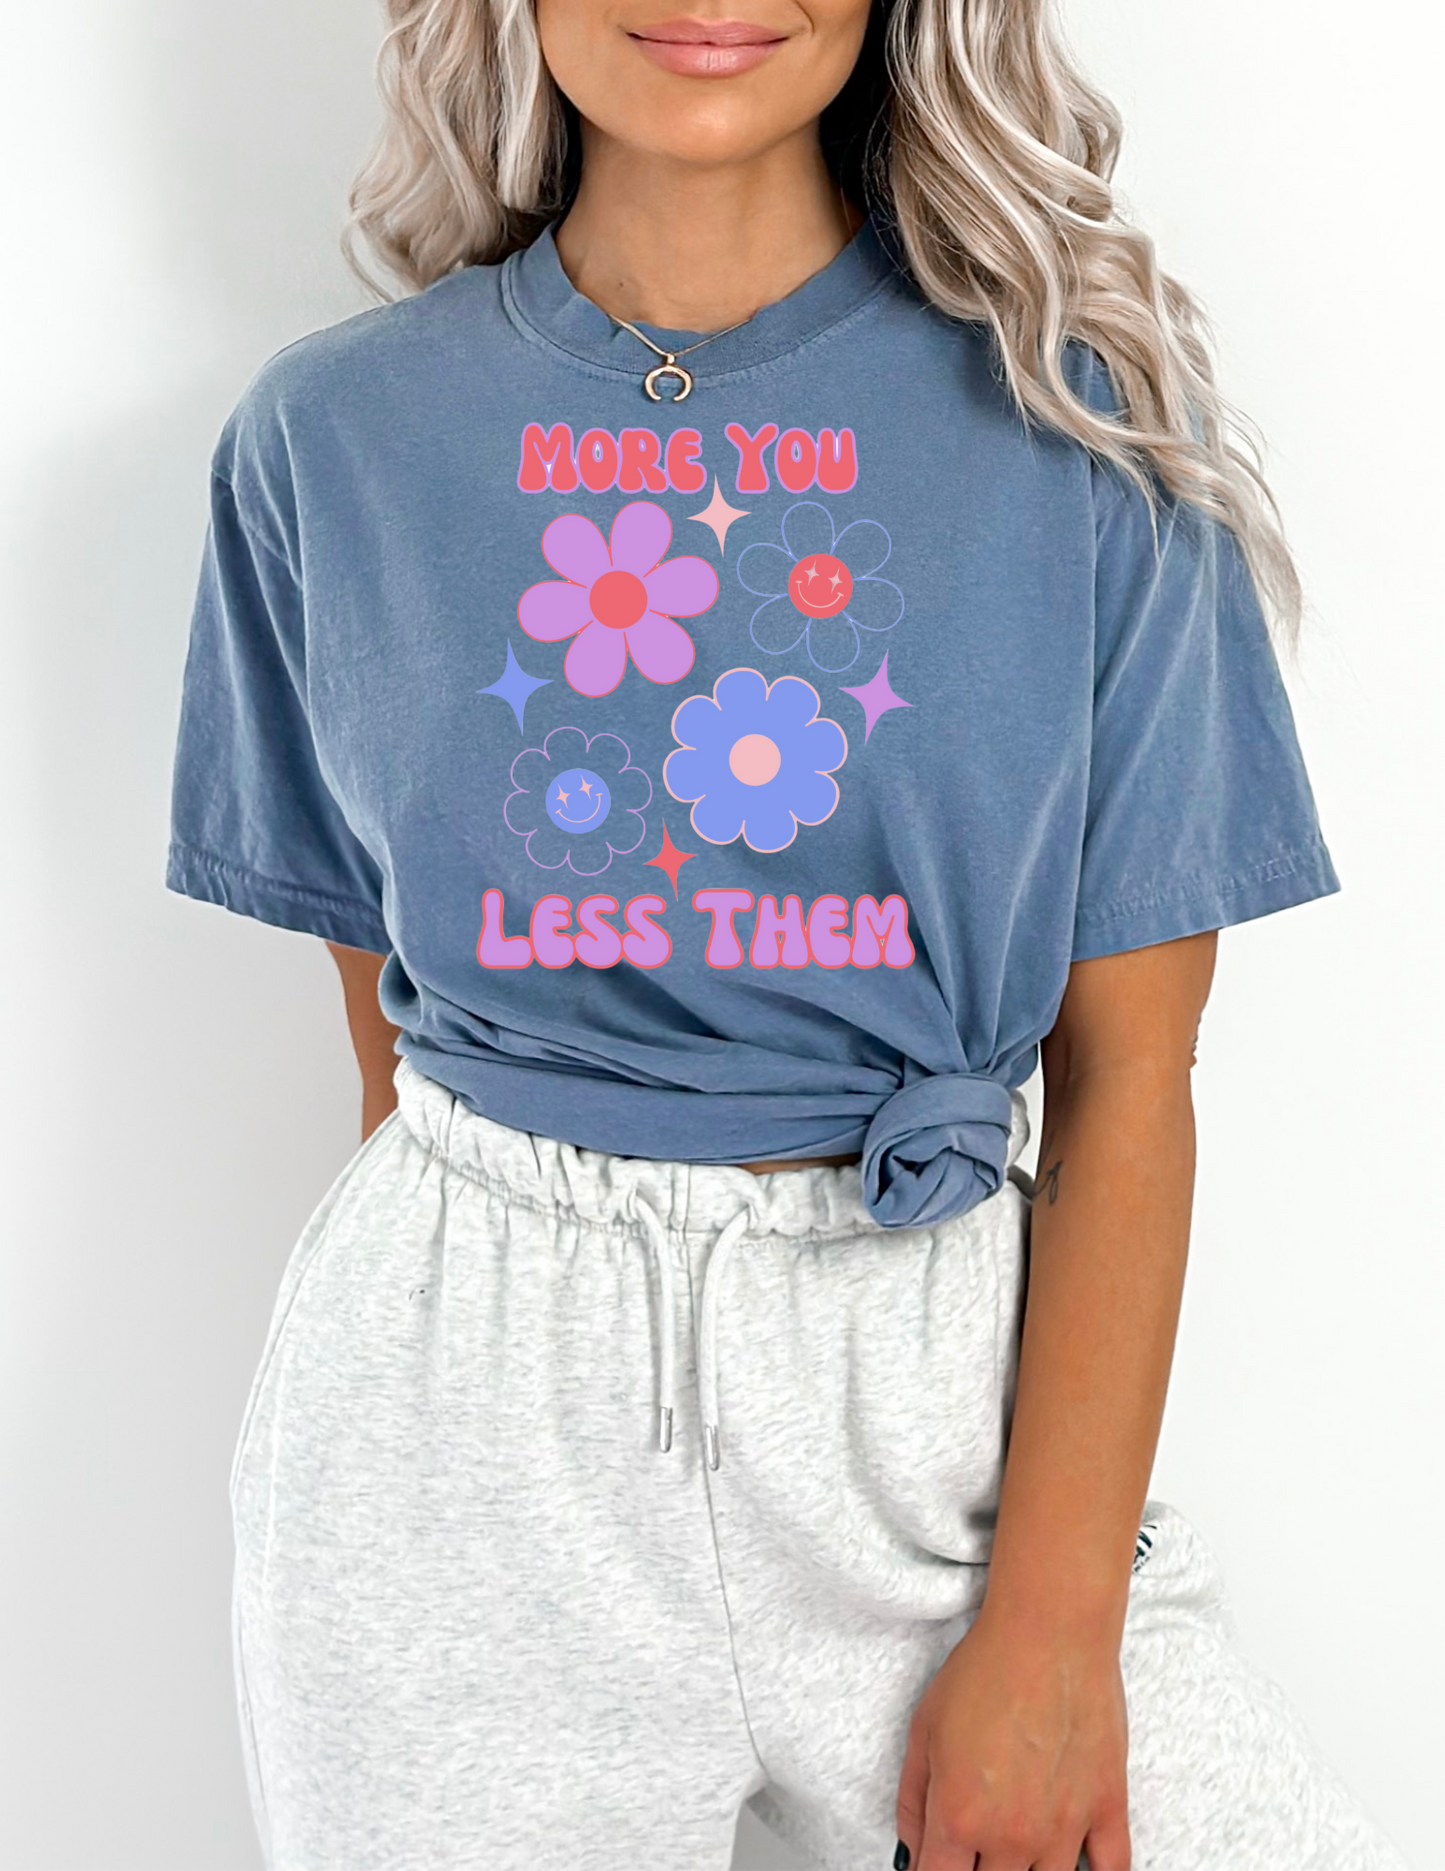 "More You Less Them" Graphic Tee